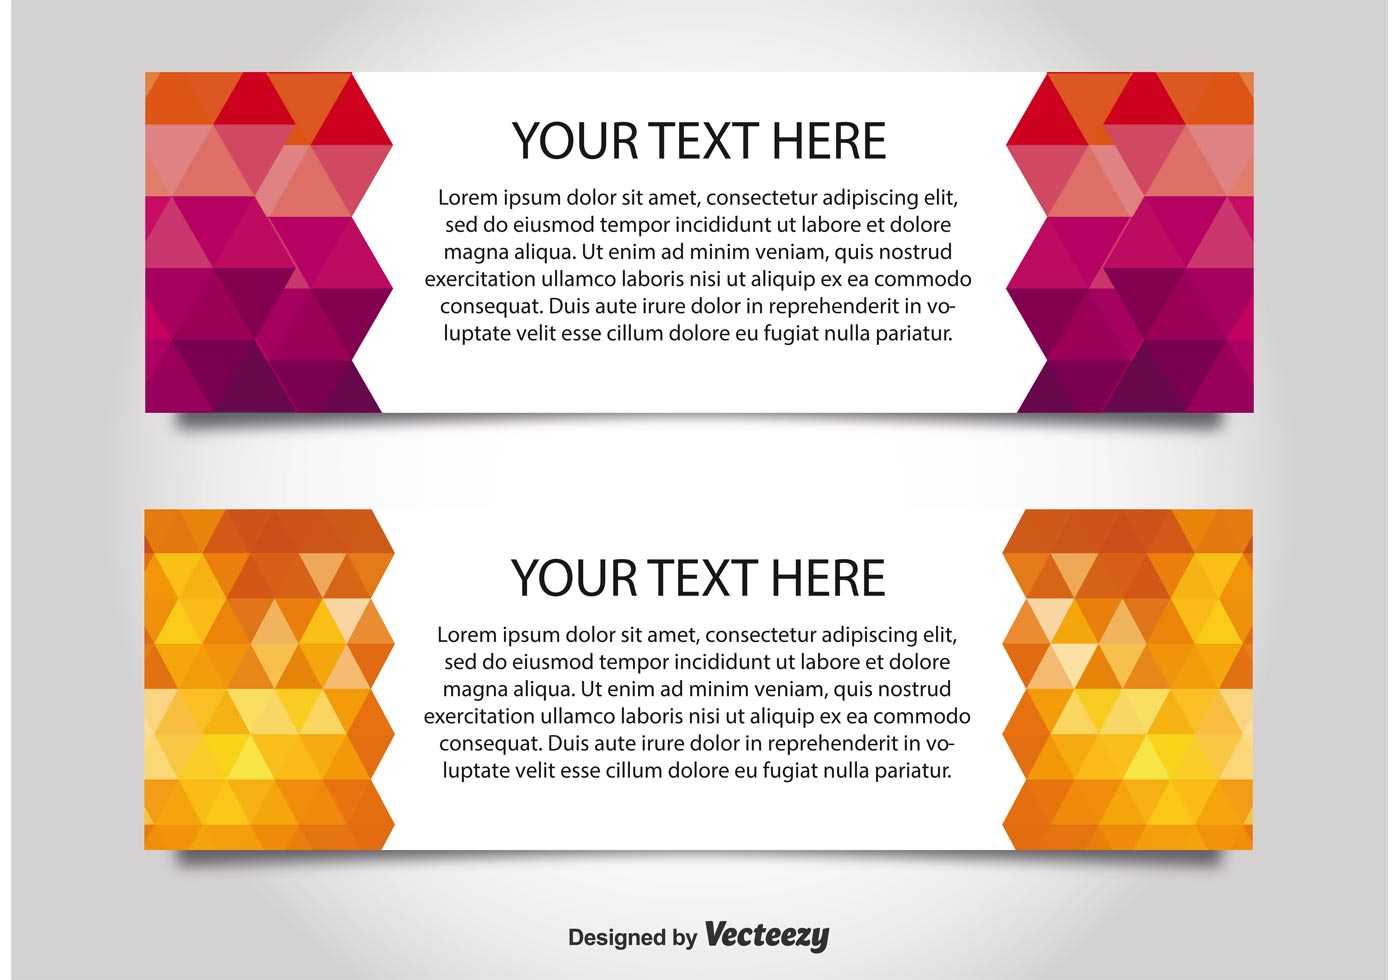 Modern Style Web Banner Templates – Download Free Vectors Throughout Free Website Banner Templates Download